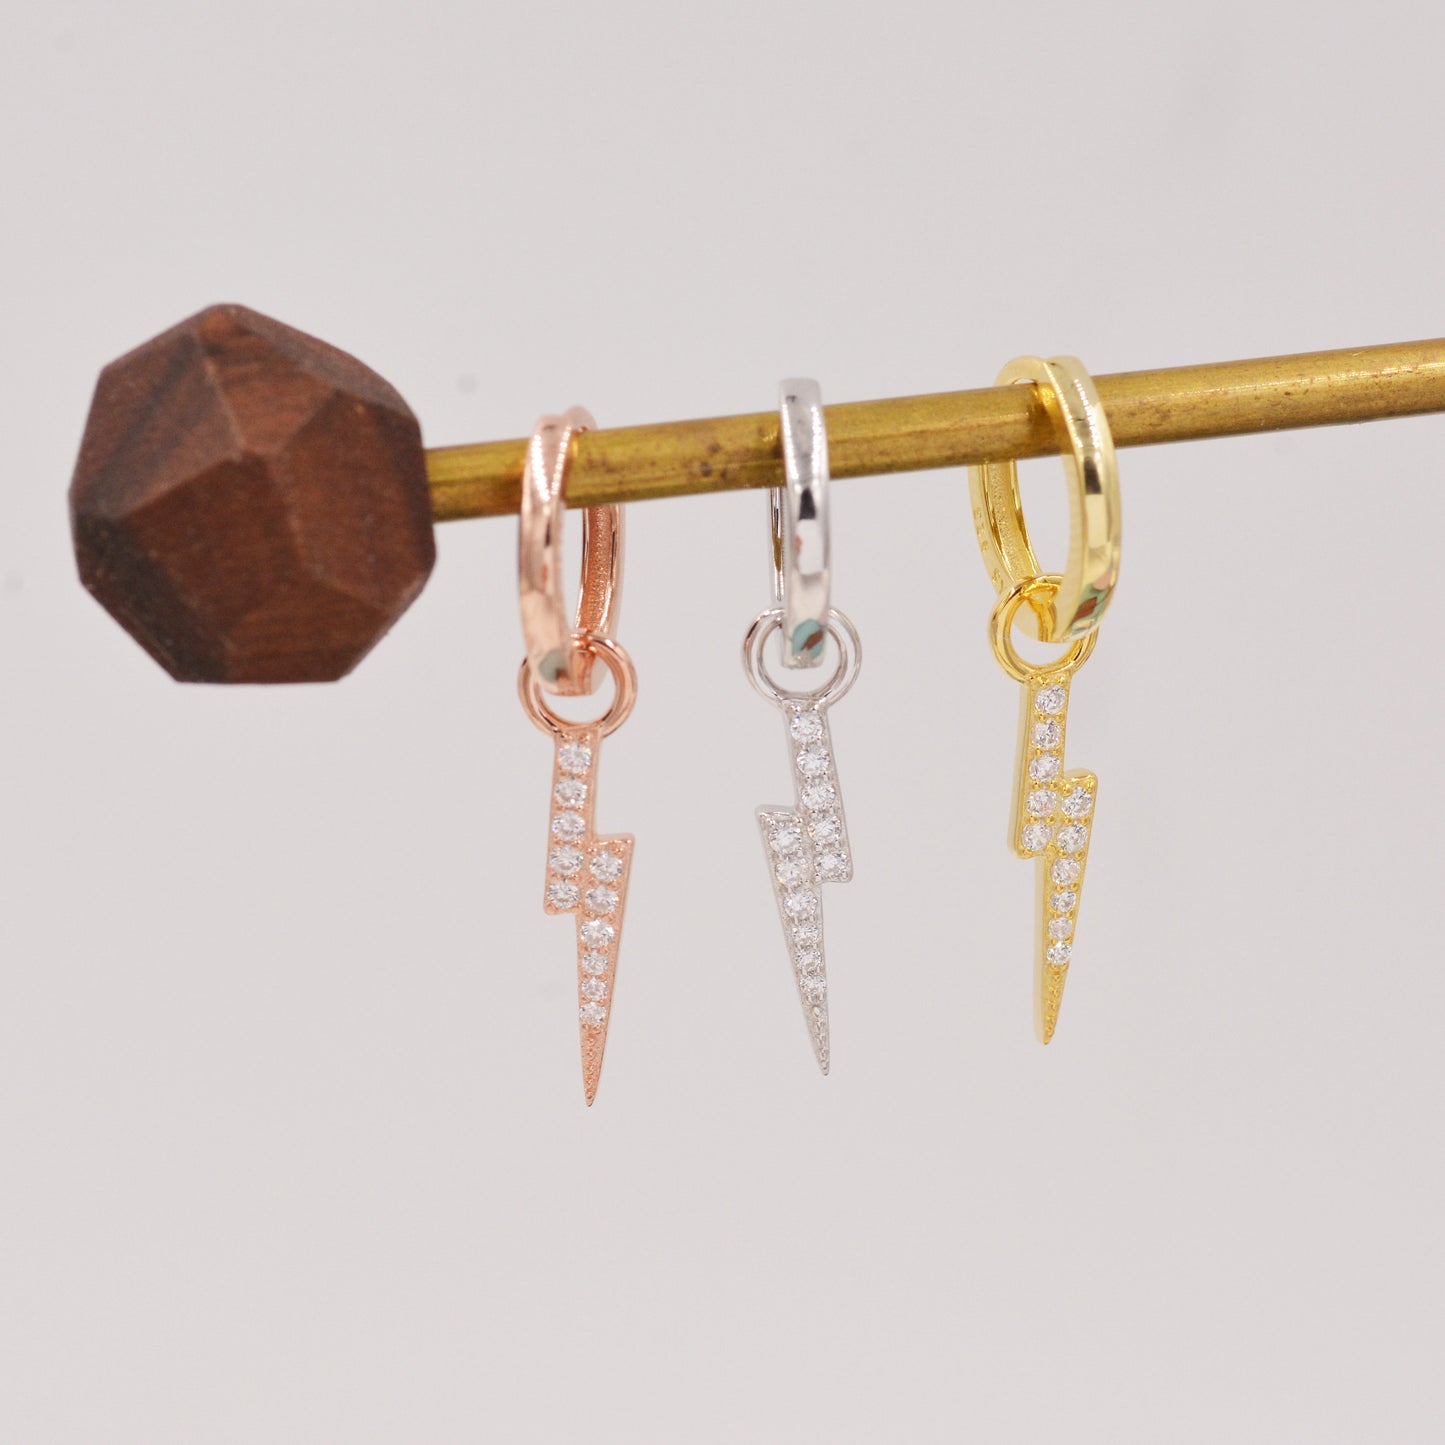 Lightning Bolt Charm Huggie Hoop Earrings in Sterling Silver with Detachable Charms, Silver, Gold or Rose Gold Lightening Earrings